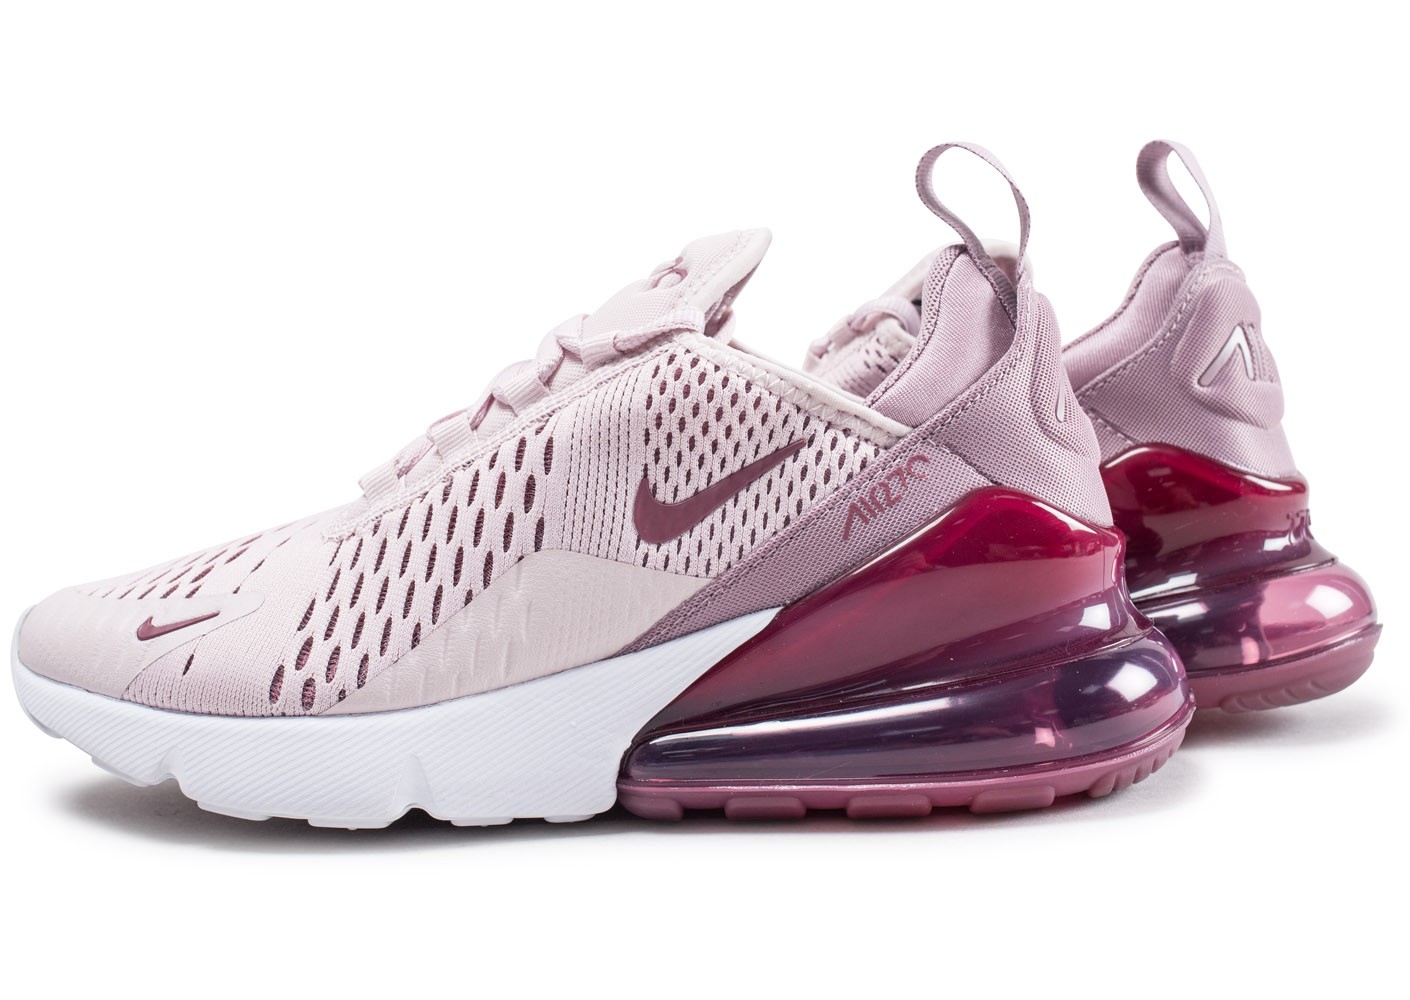 nike air max 270 femme pas cher - 52% remise - www ...